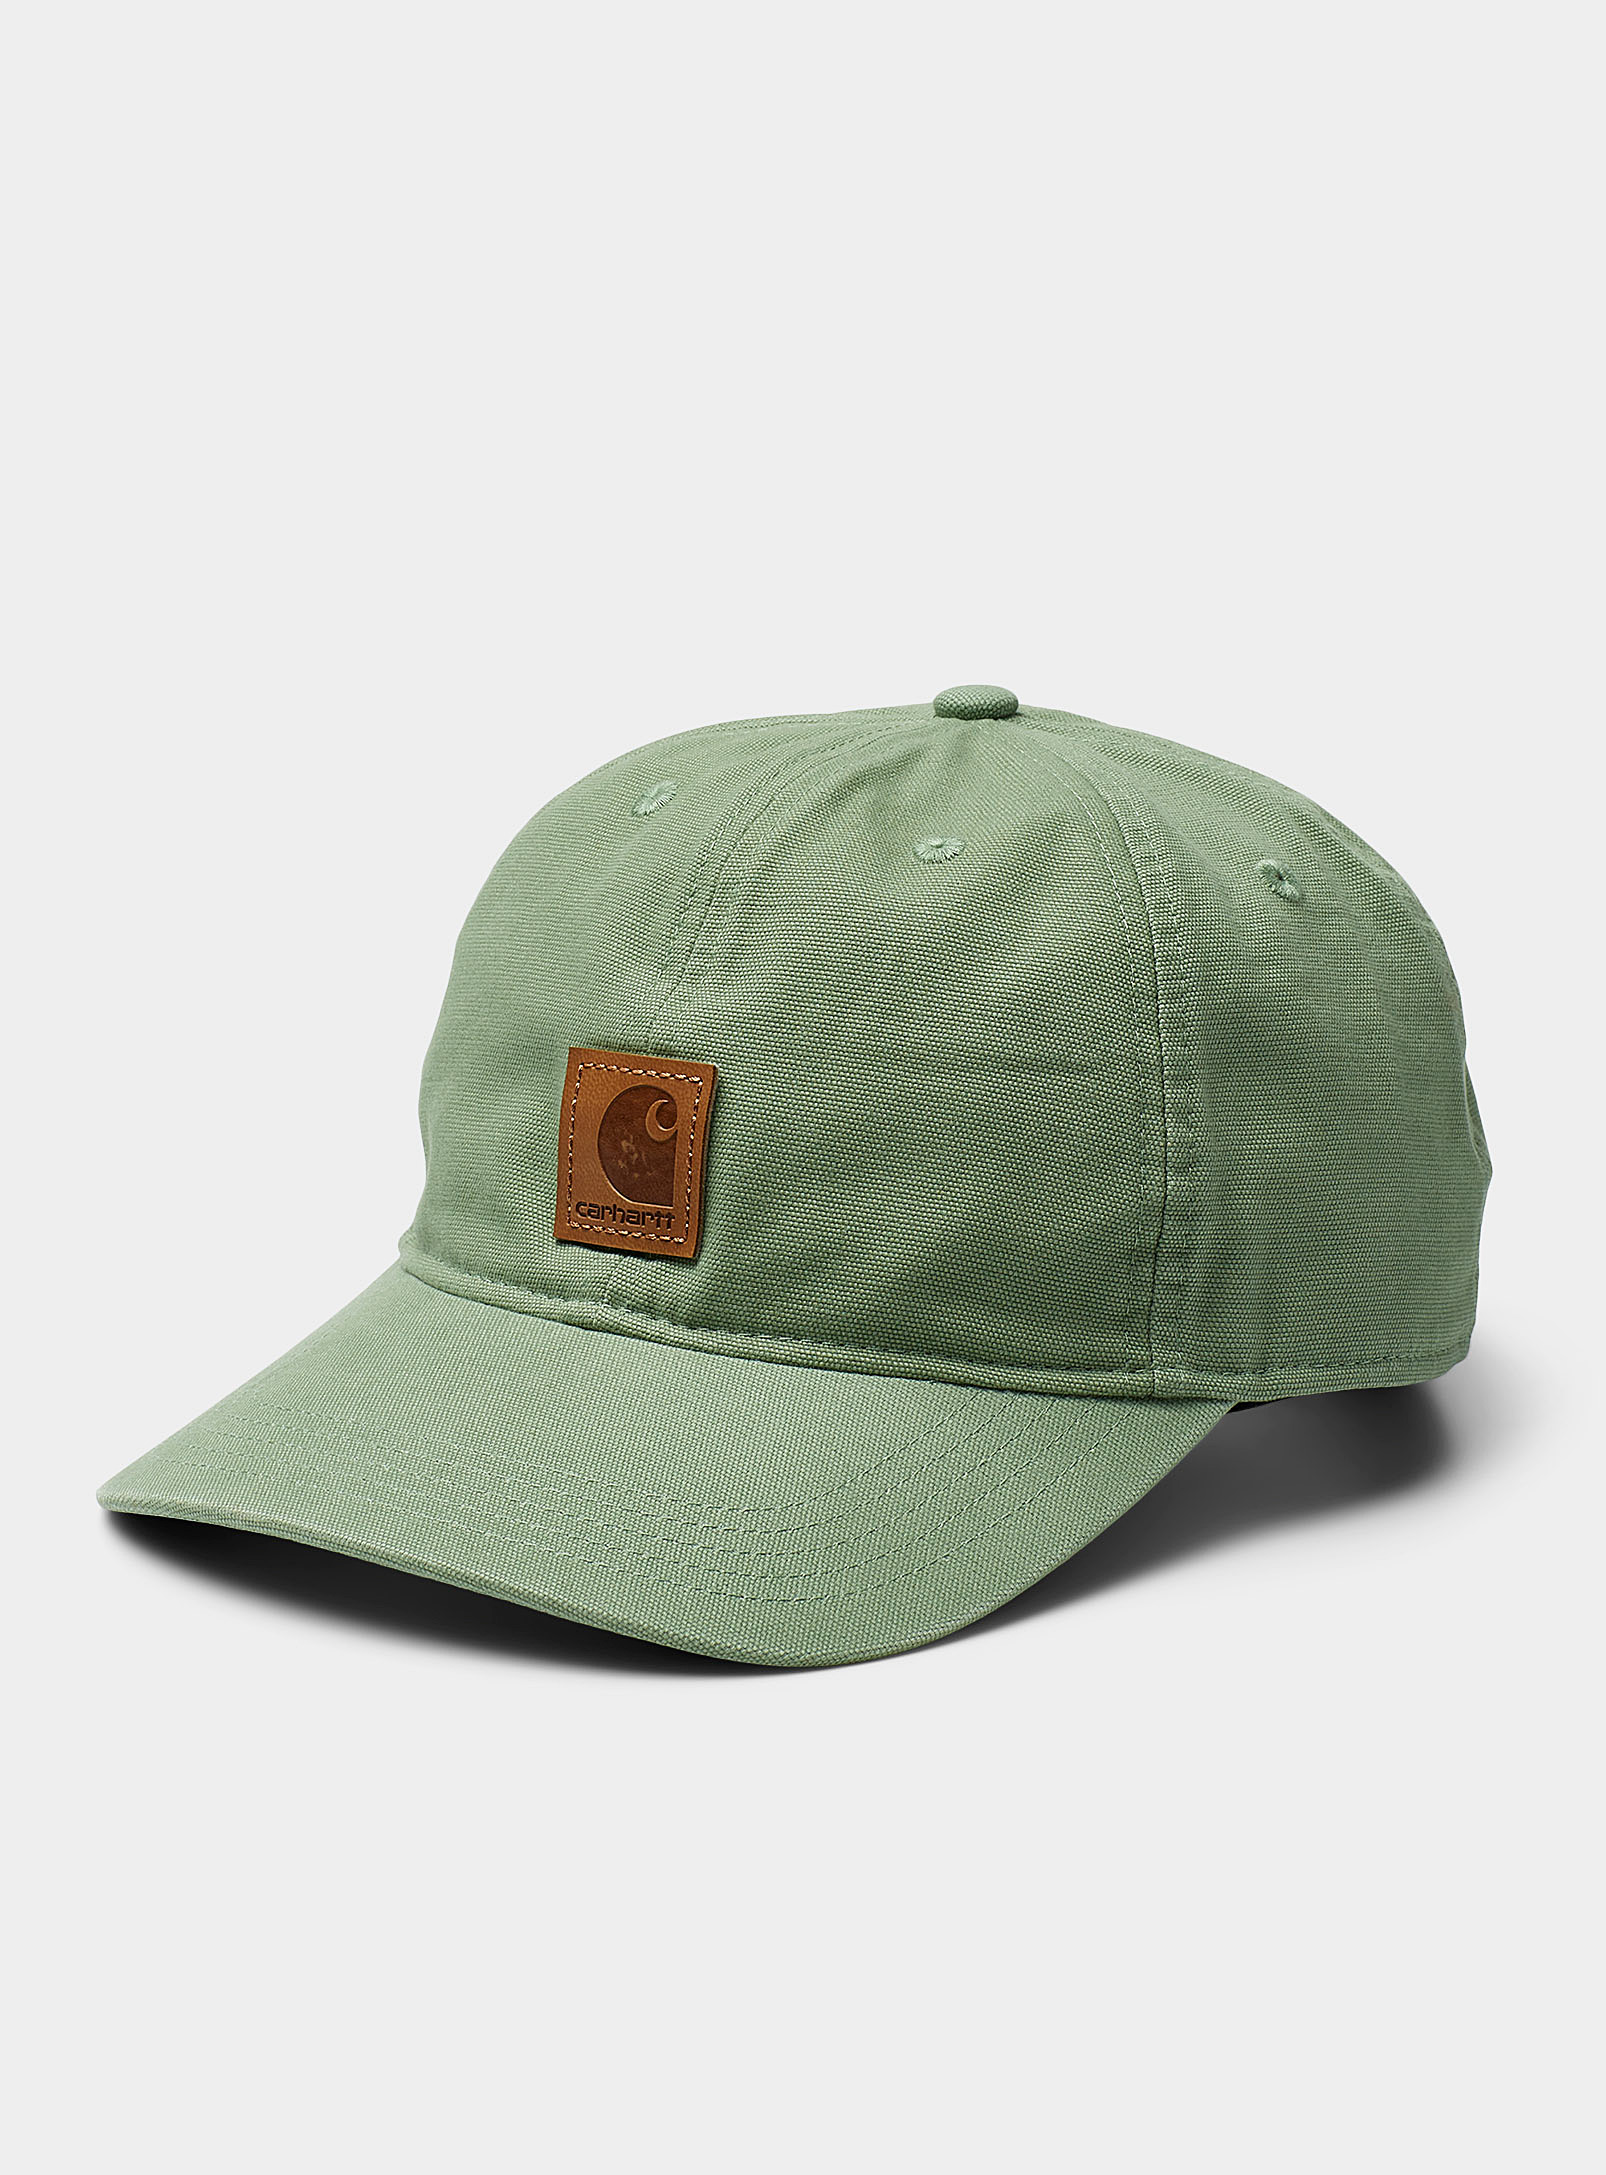 Carhartt Washed Cotton Baseball Cap In Assorted